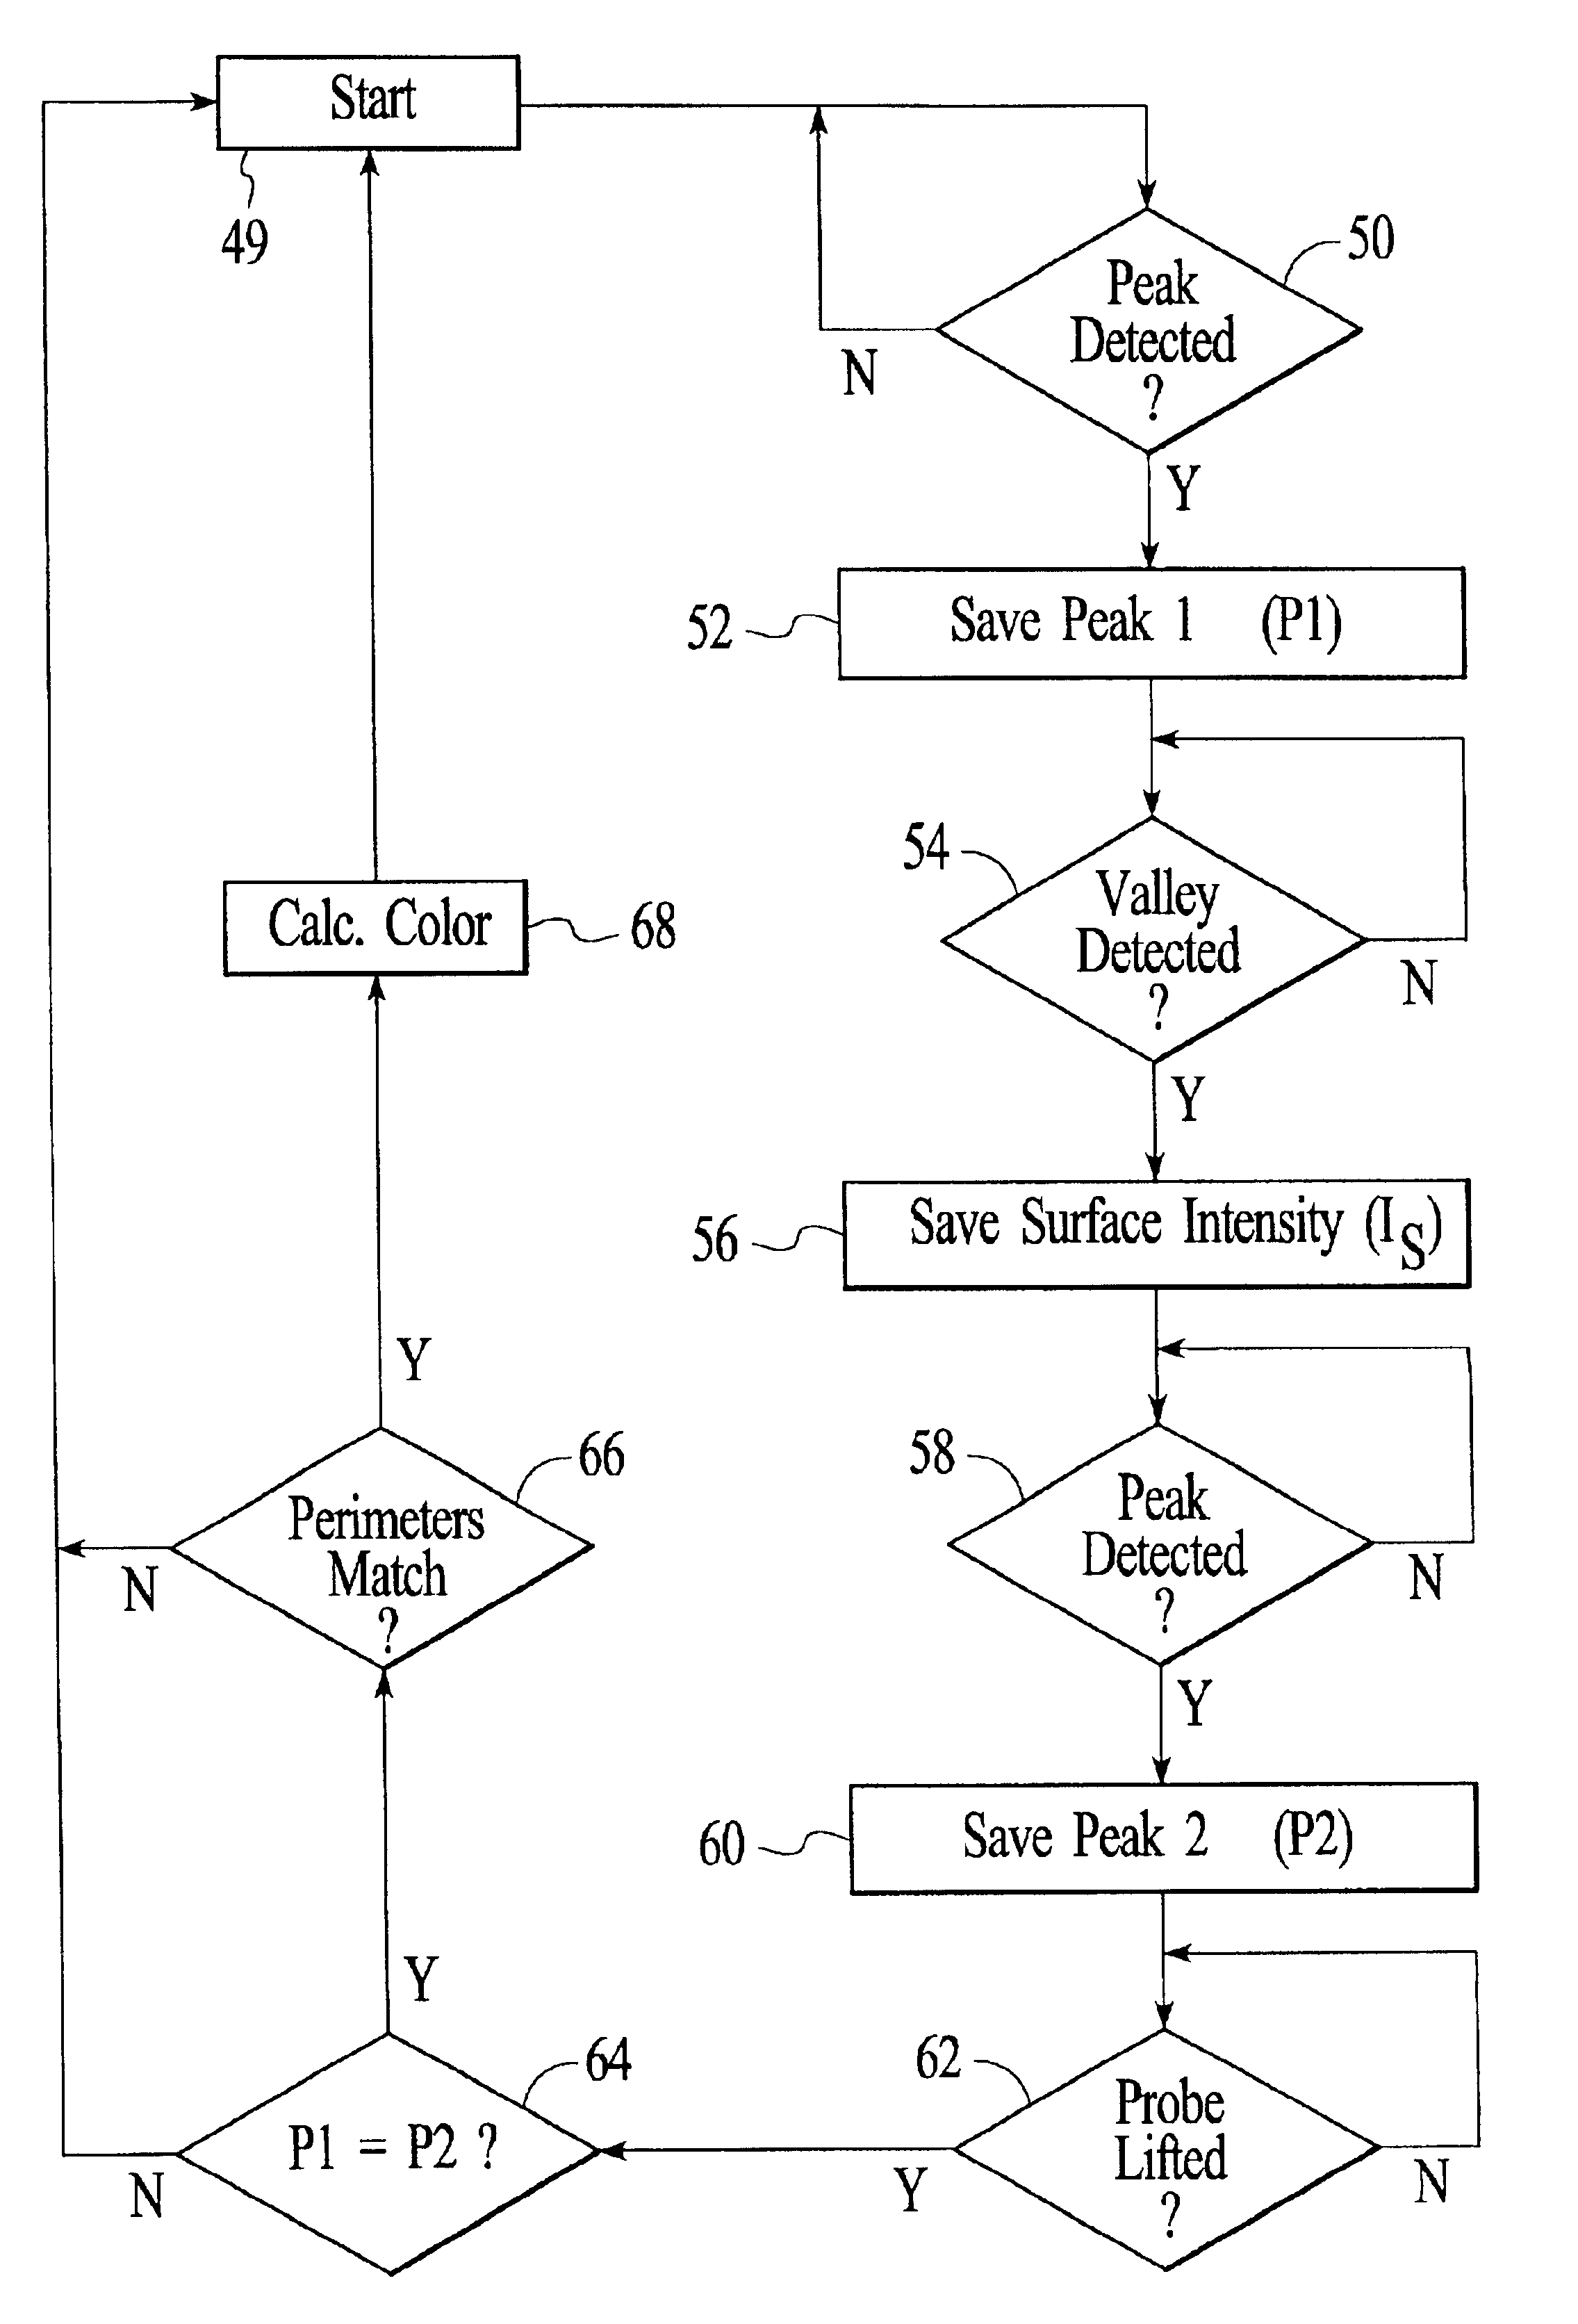 Apparatus for determining multi-bit data via light received by a light receiver and coupled to spectral sensors that measure light in spectral bands